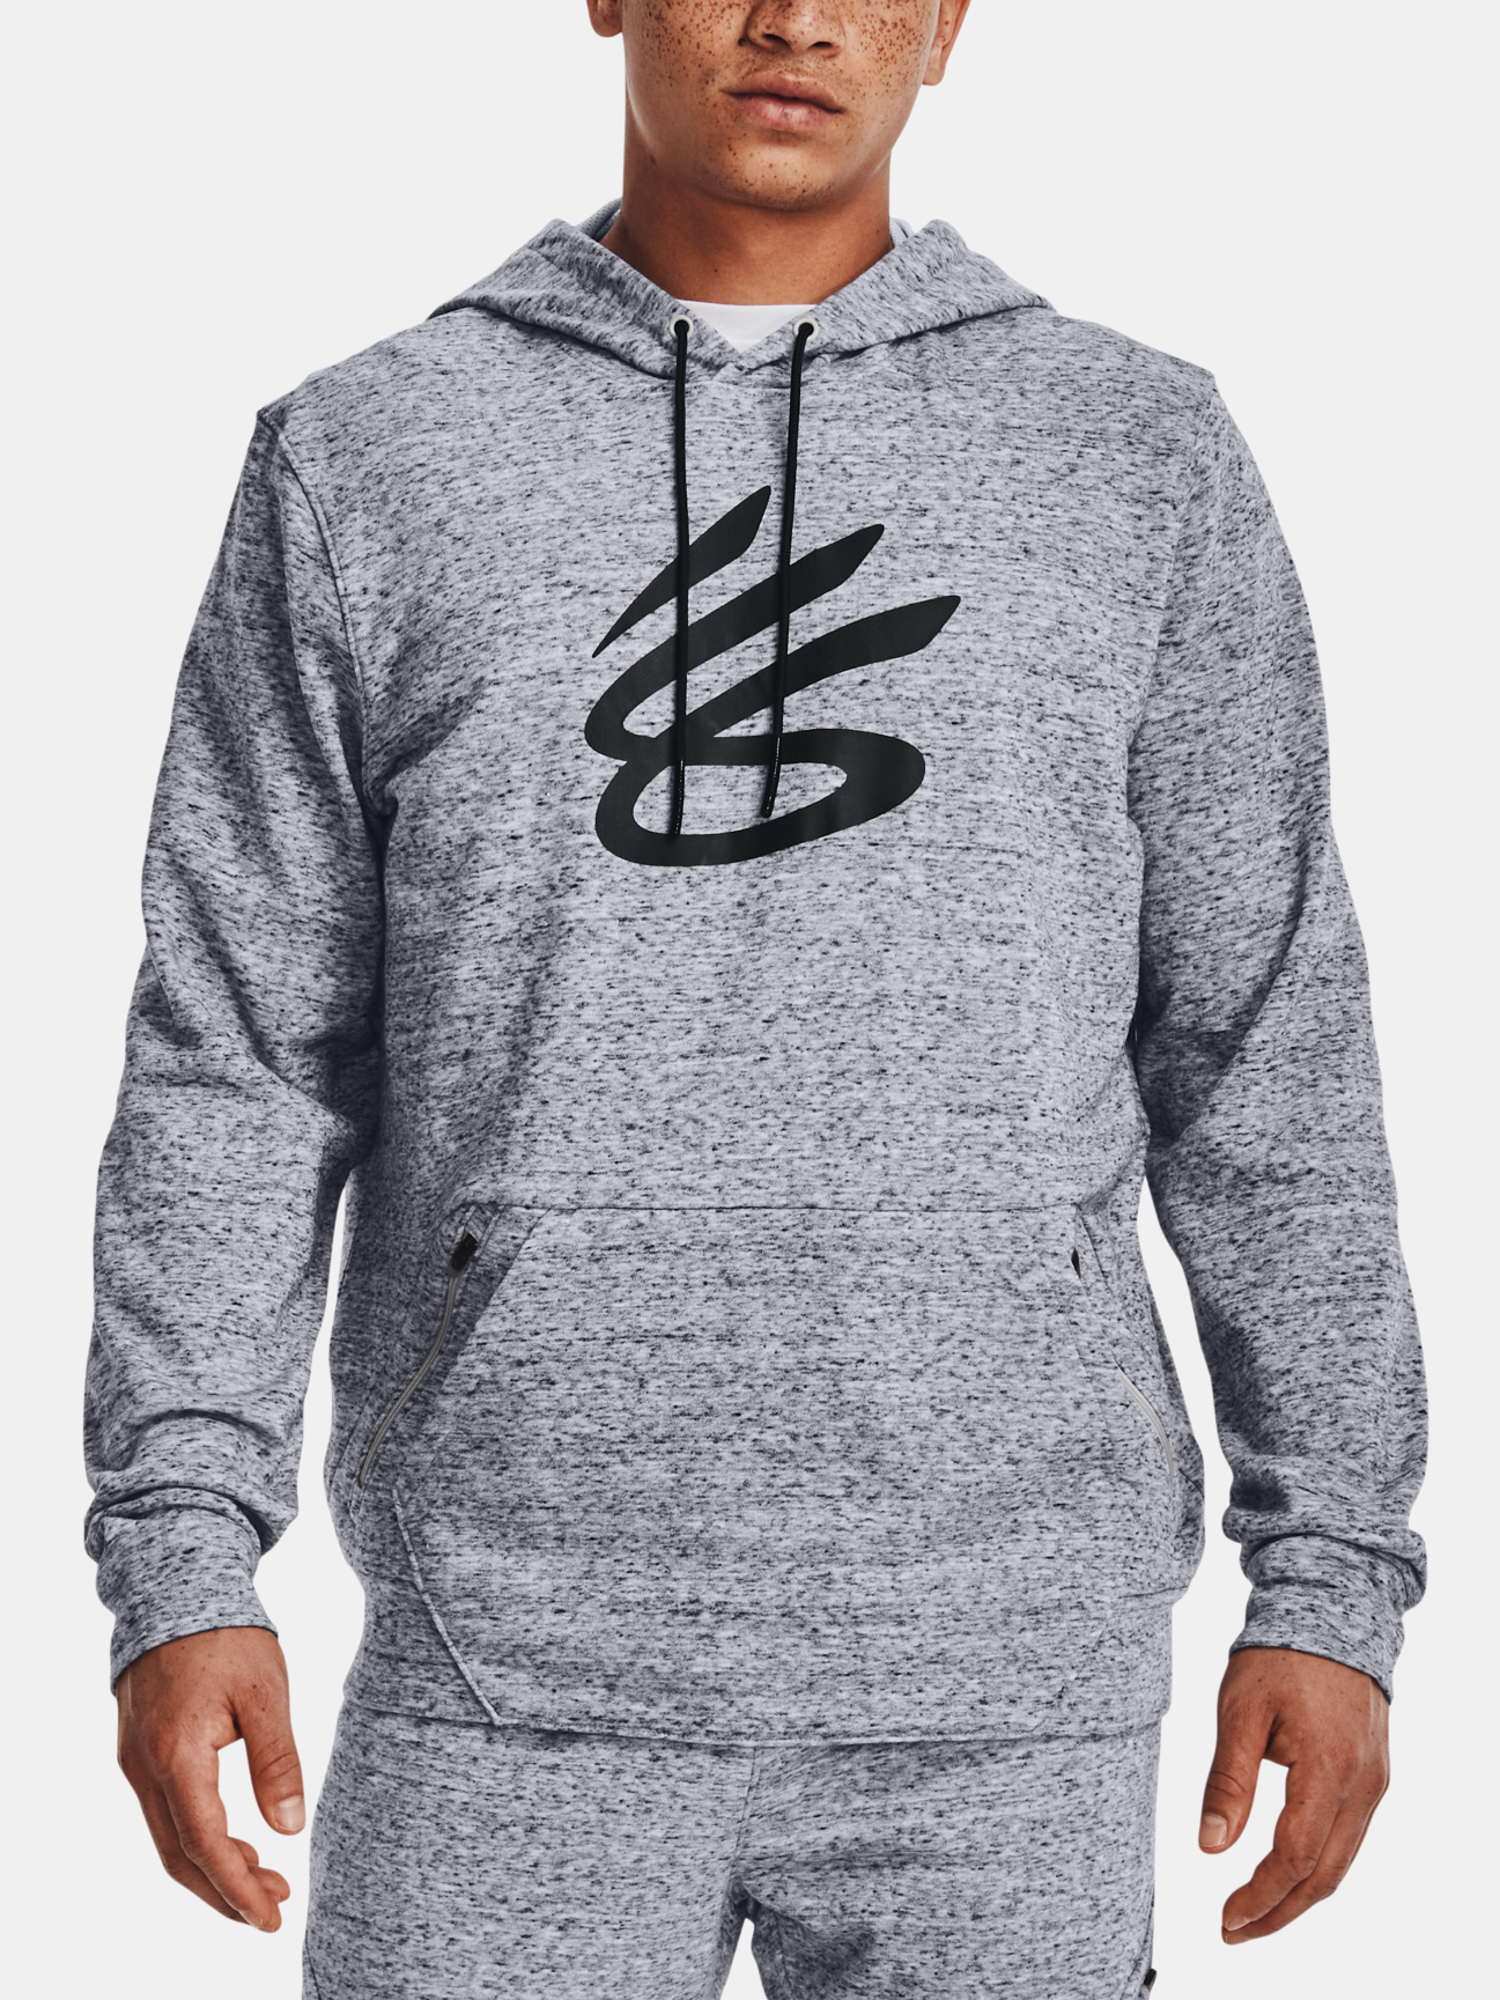 Under Armour Sweatshirt CURRY PULLOVER HOOD-GRY - Men